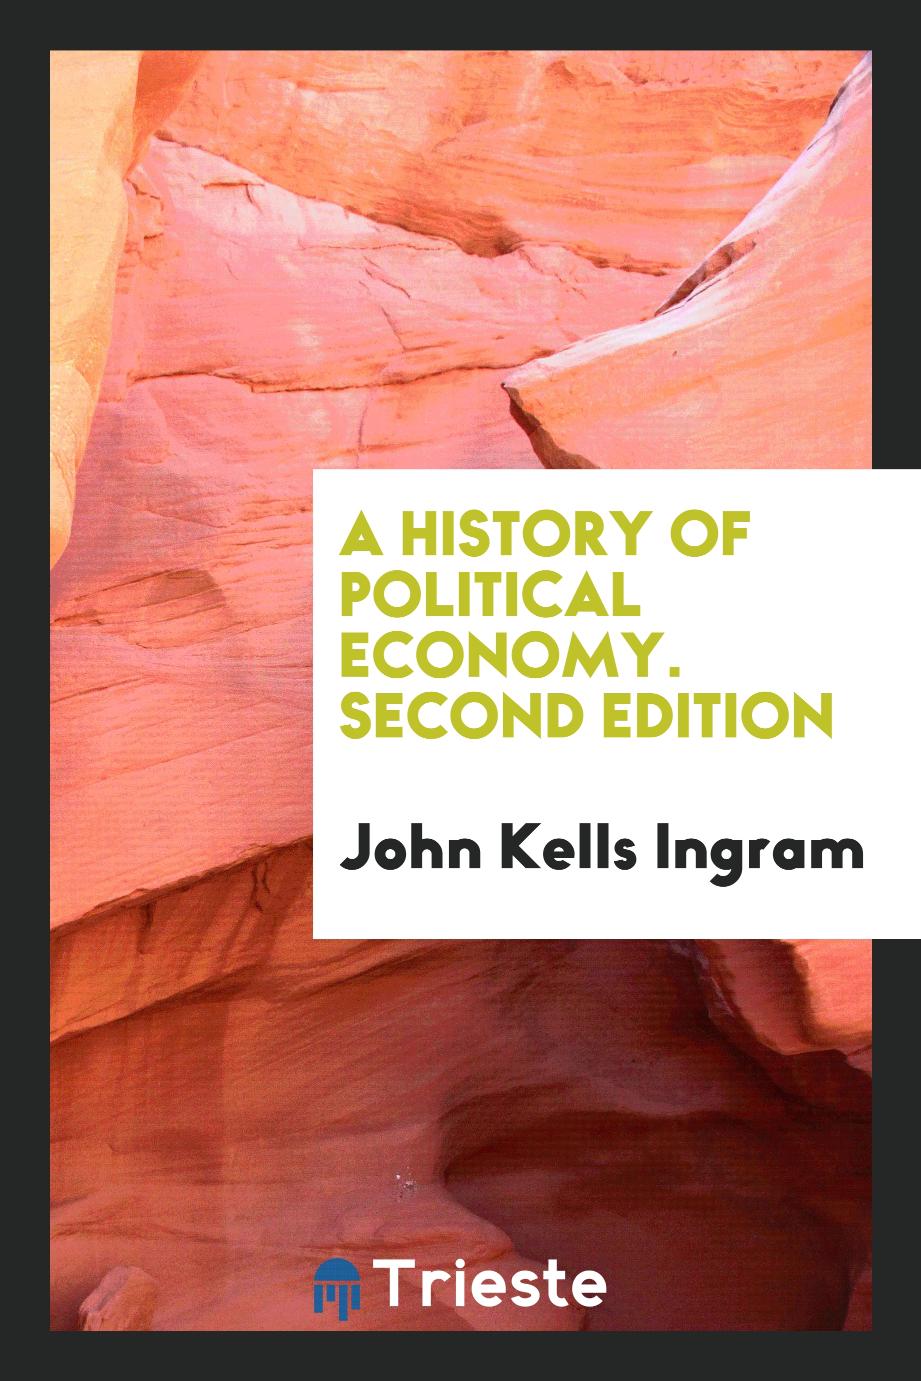 A history of political economy. Second edition